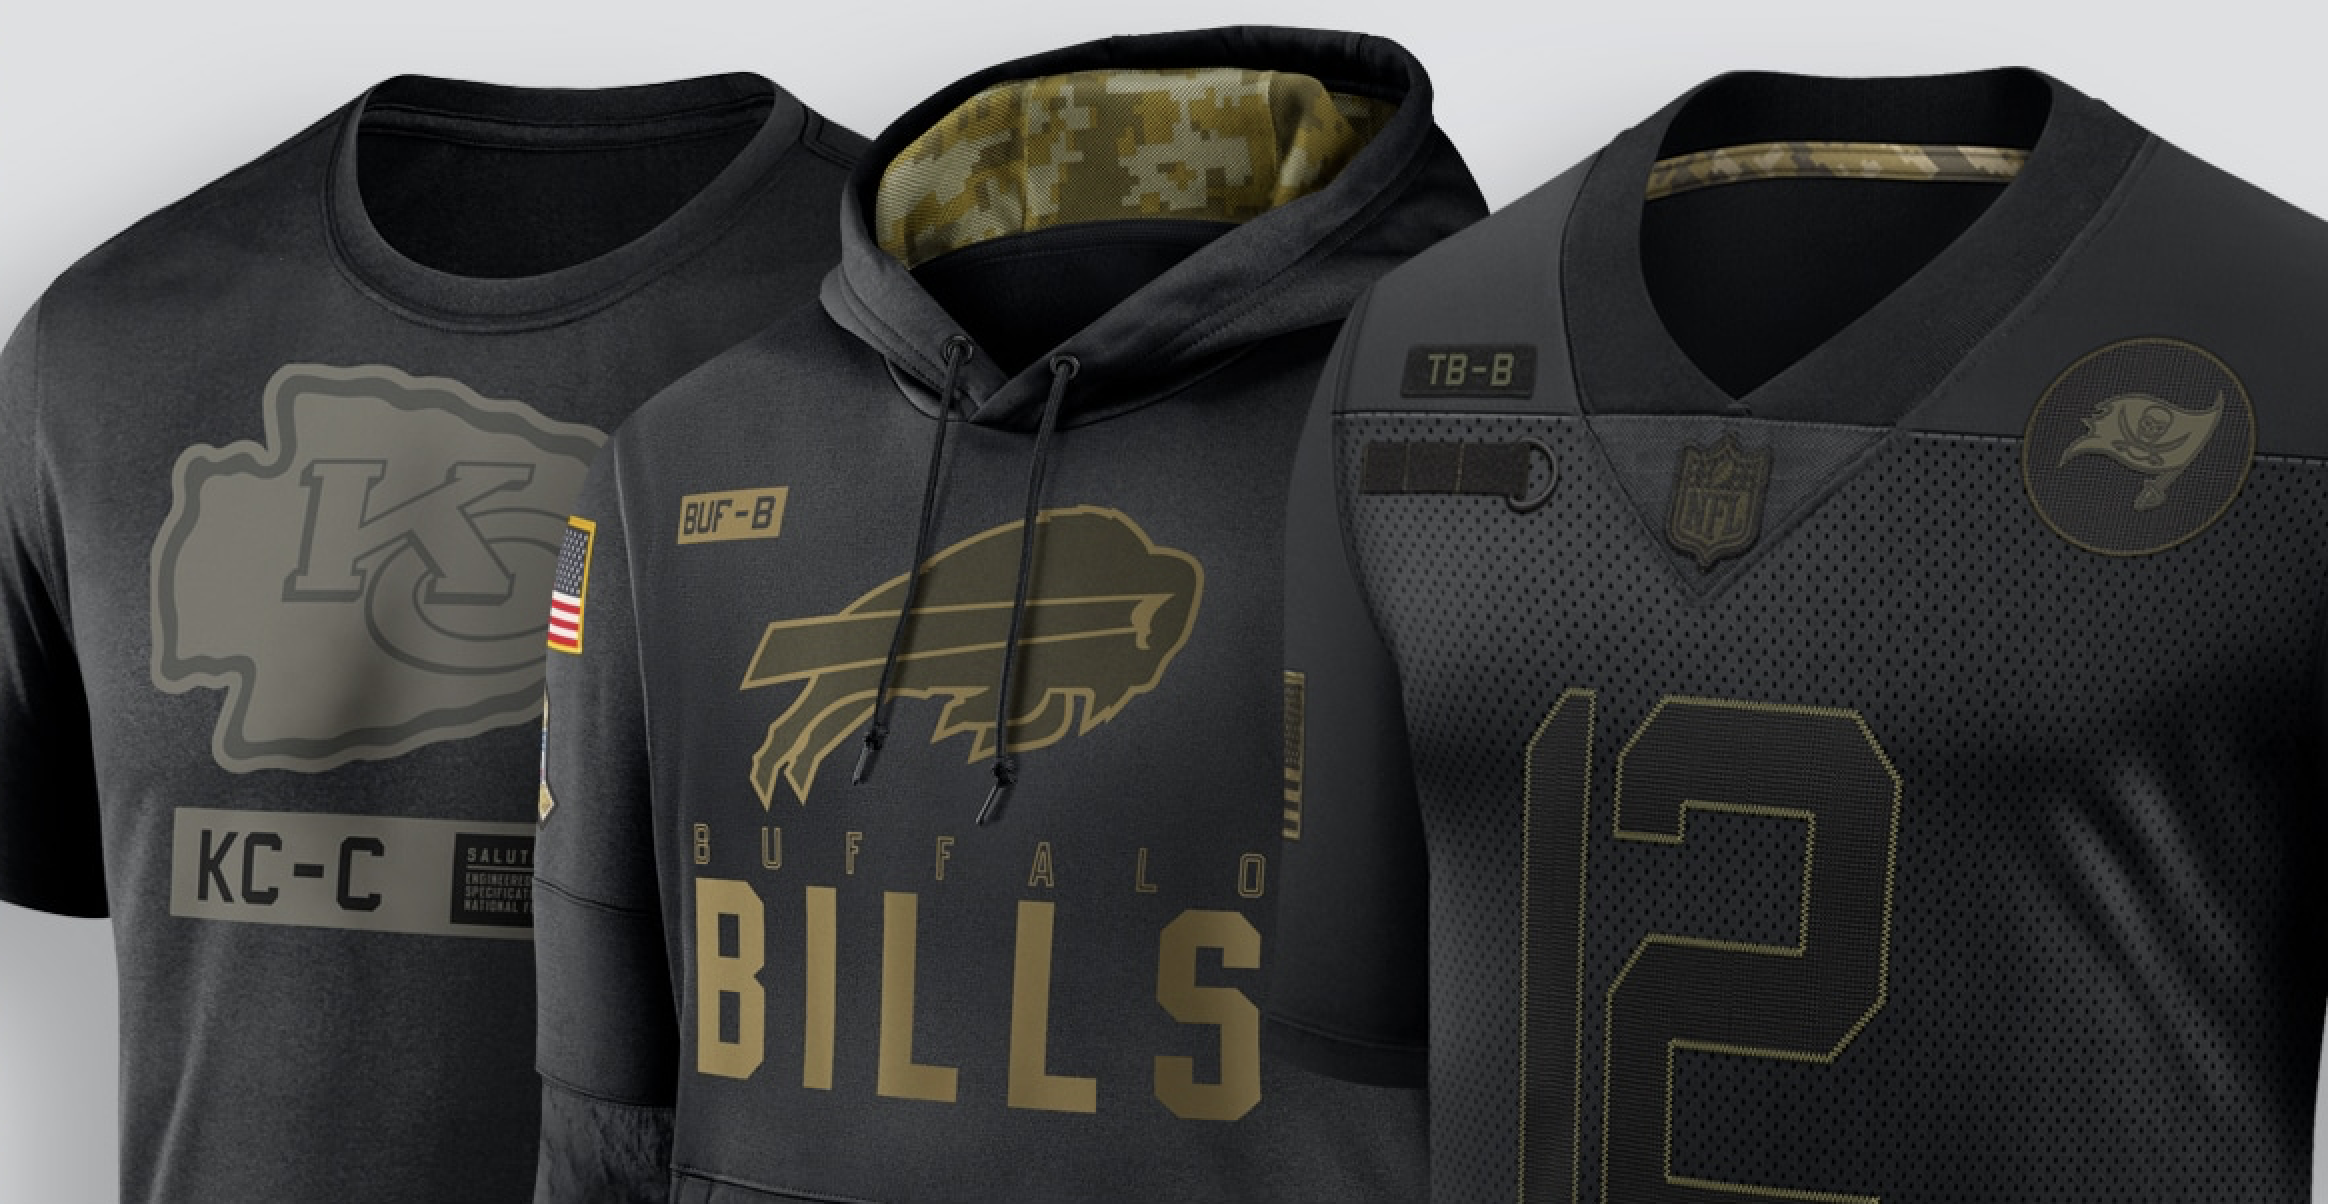 2020 salute to service jersey